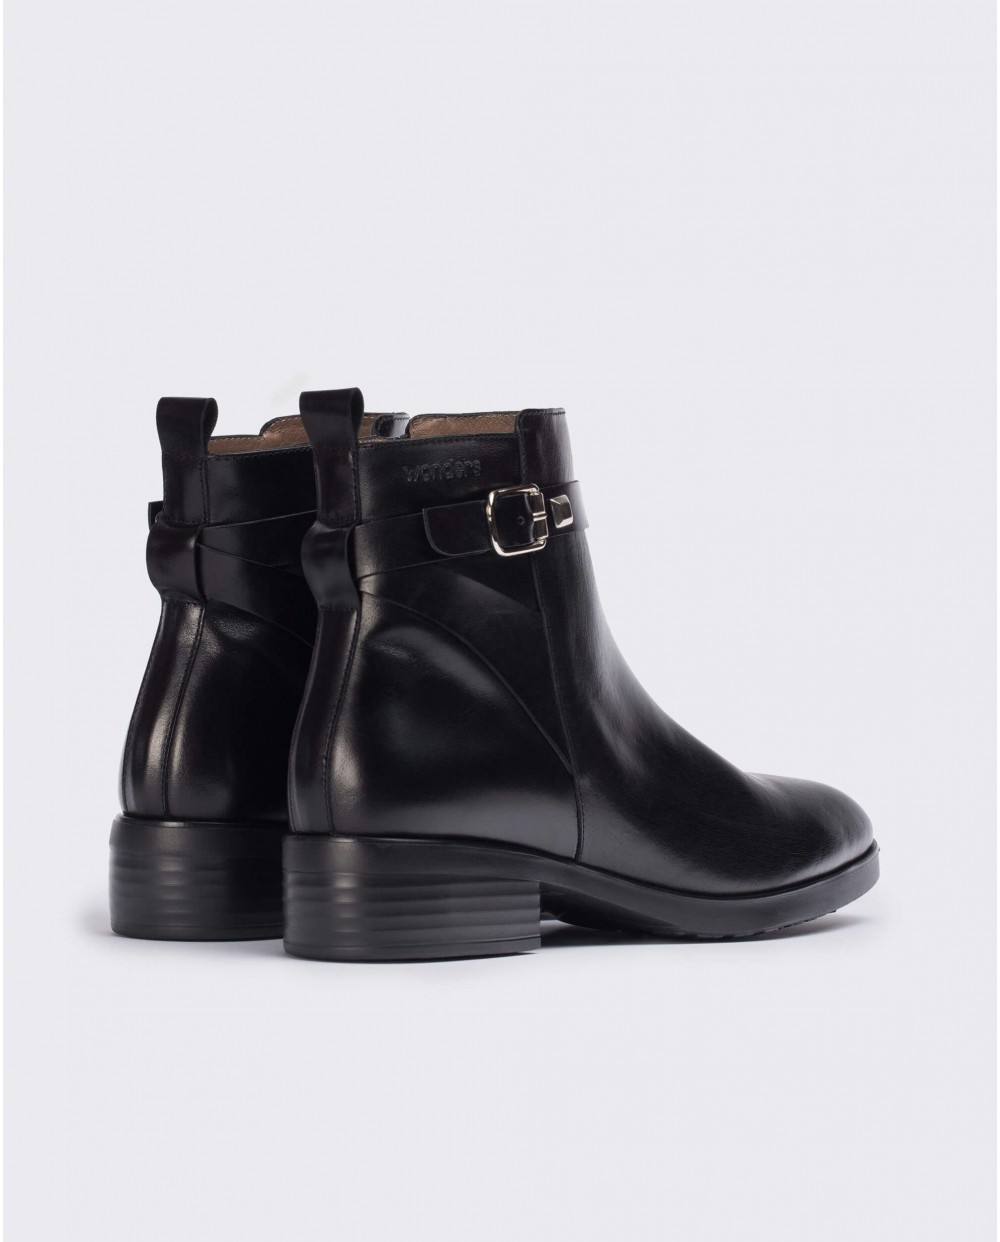 Wonders-Ankle Boots-Black Dai Ankle Boot